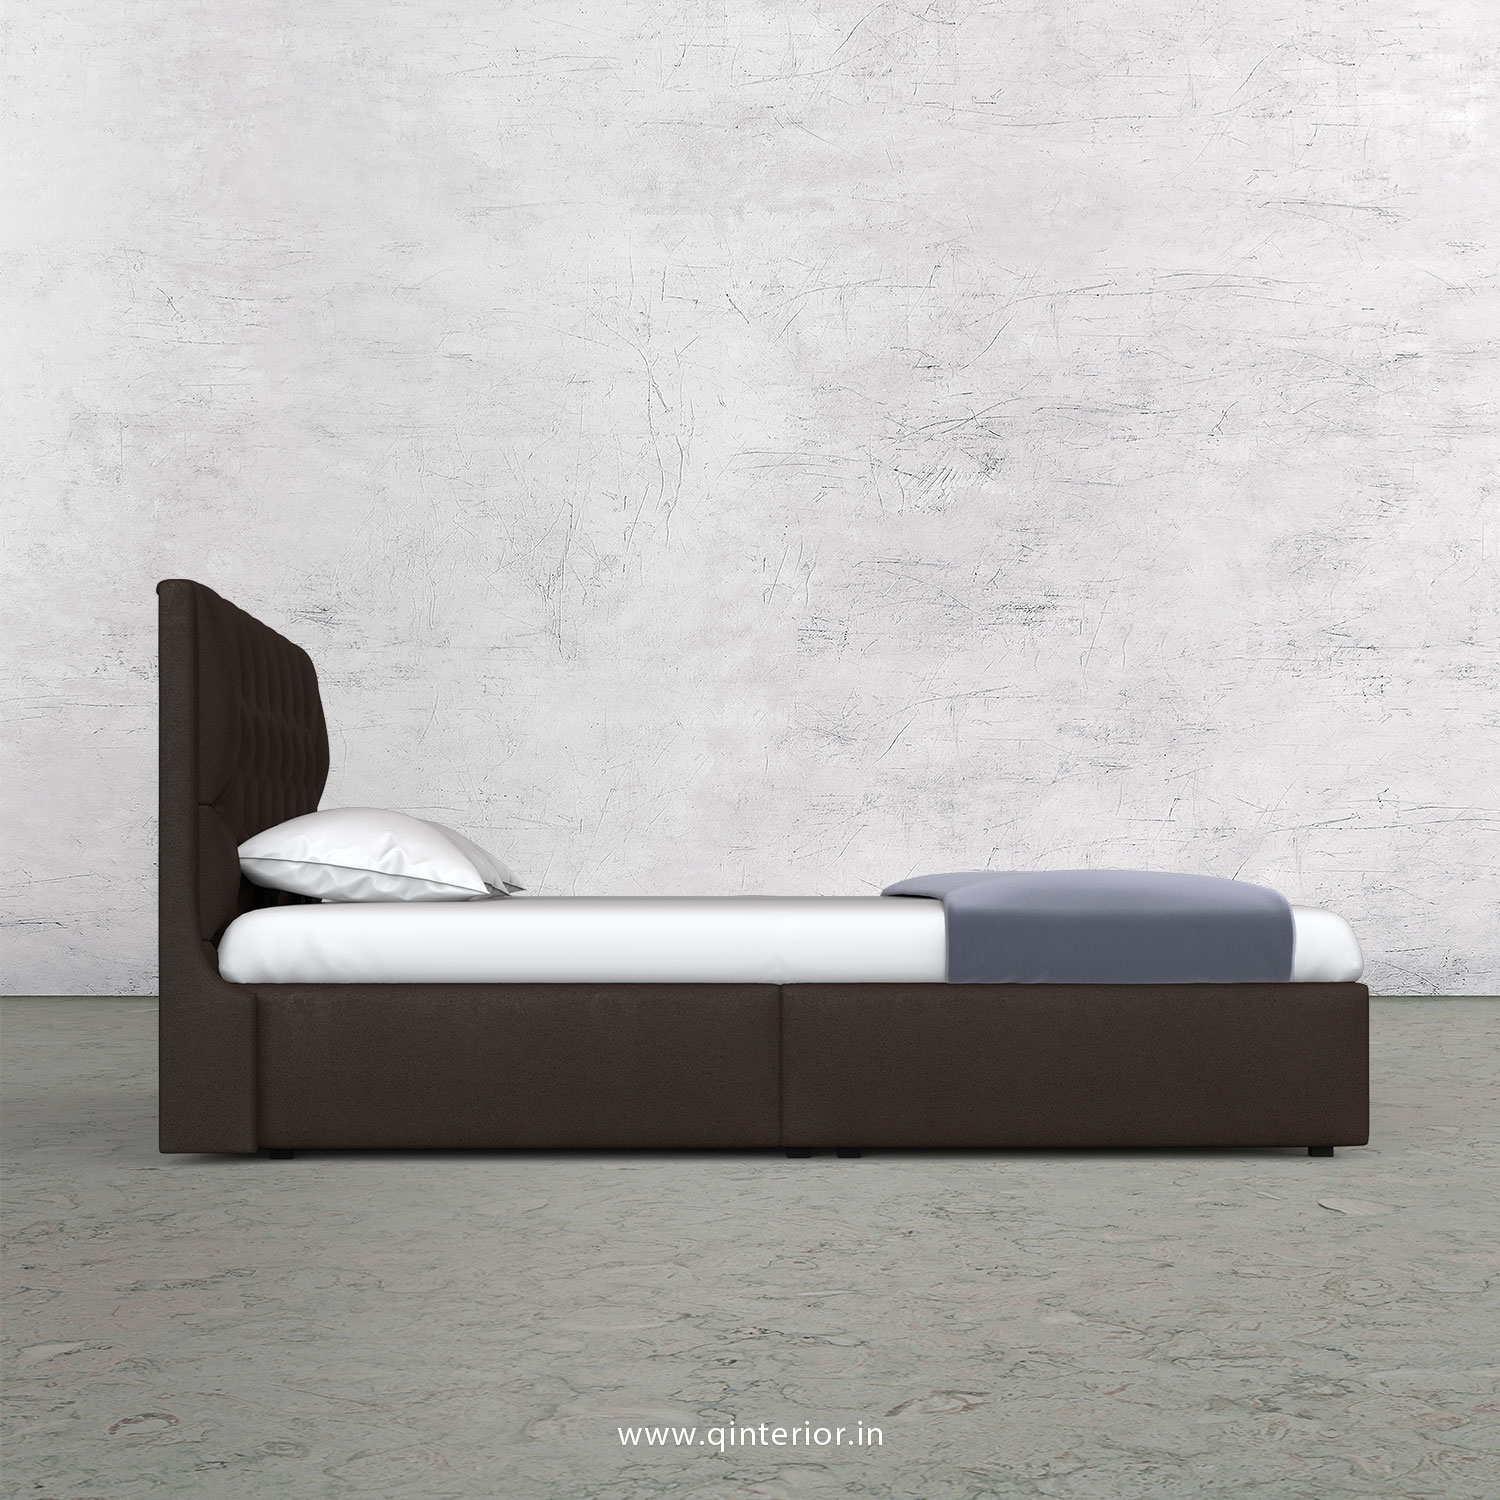 Scorpius King Size Bed in Fab Leather Fabric - KBD009 FL16